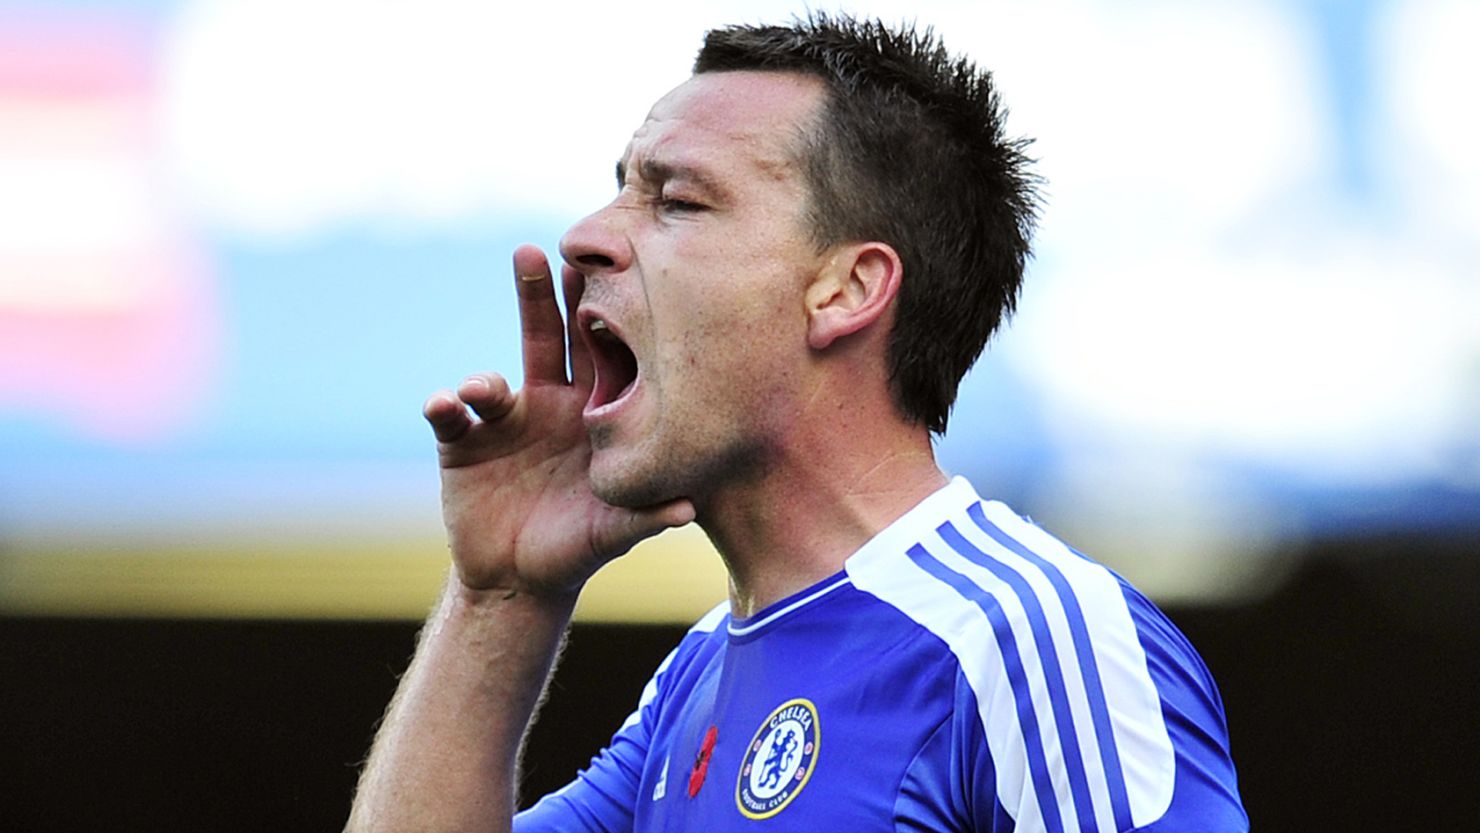 Chelsea captain John Terry shouts instructions during an English Premier League match against Arsenal on Saturday.